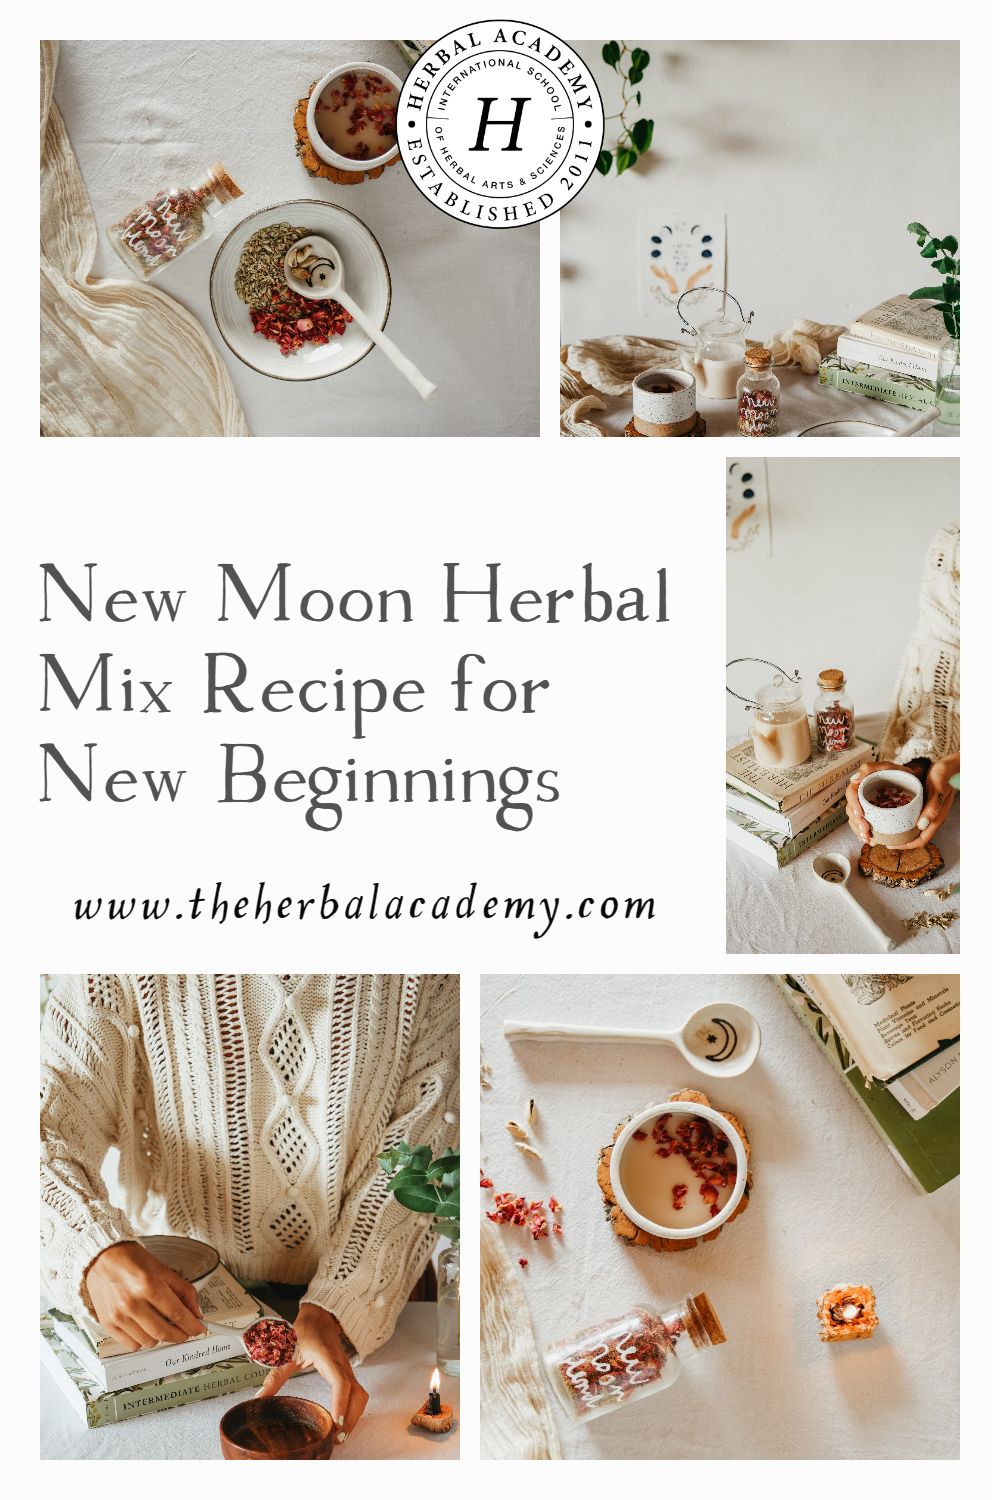 New Moon Herbal Mix Recipe for New Beginnings | Herbal Academy | This article will discuss the energy of the New Moon and how to support yourself with herbs during this internal time in the lunar cycle.